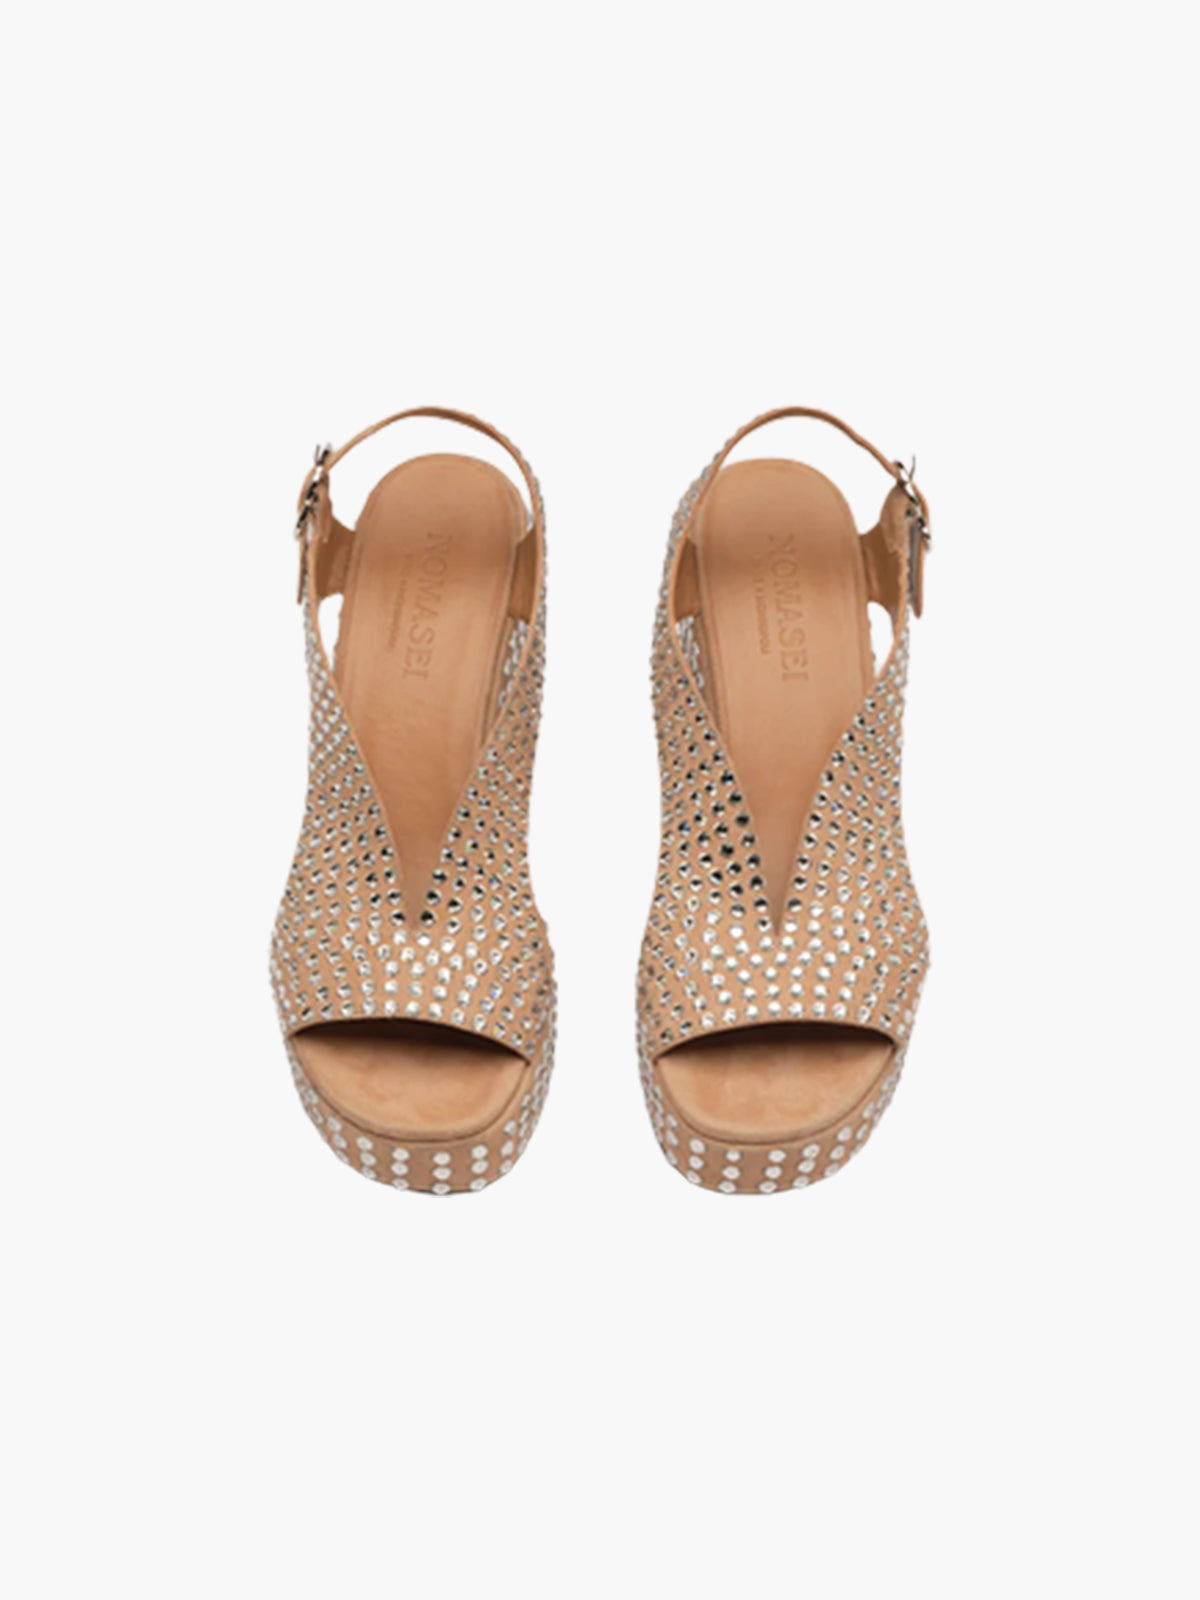 Taxi Sandals | Nude Crystal